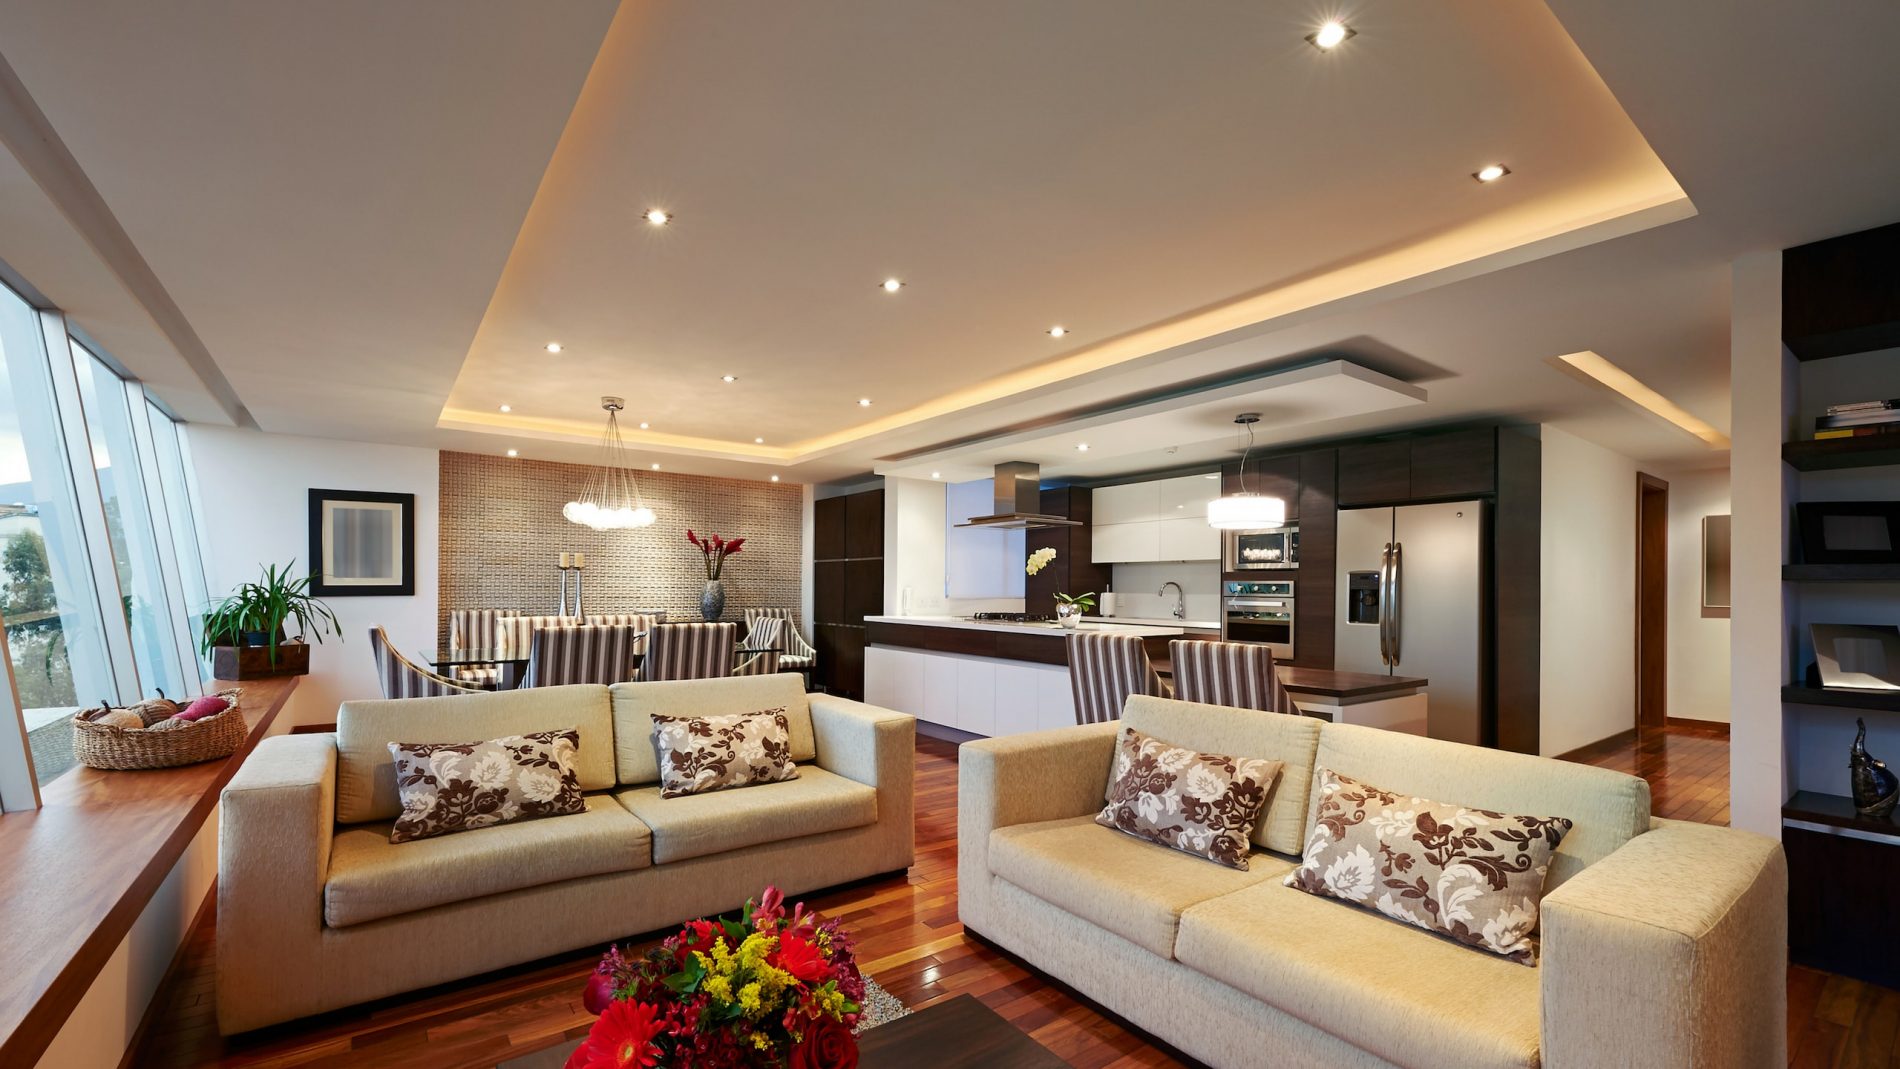 Top ten tips to make your home more luxurious